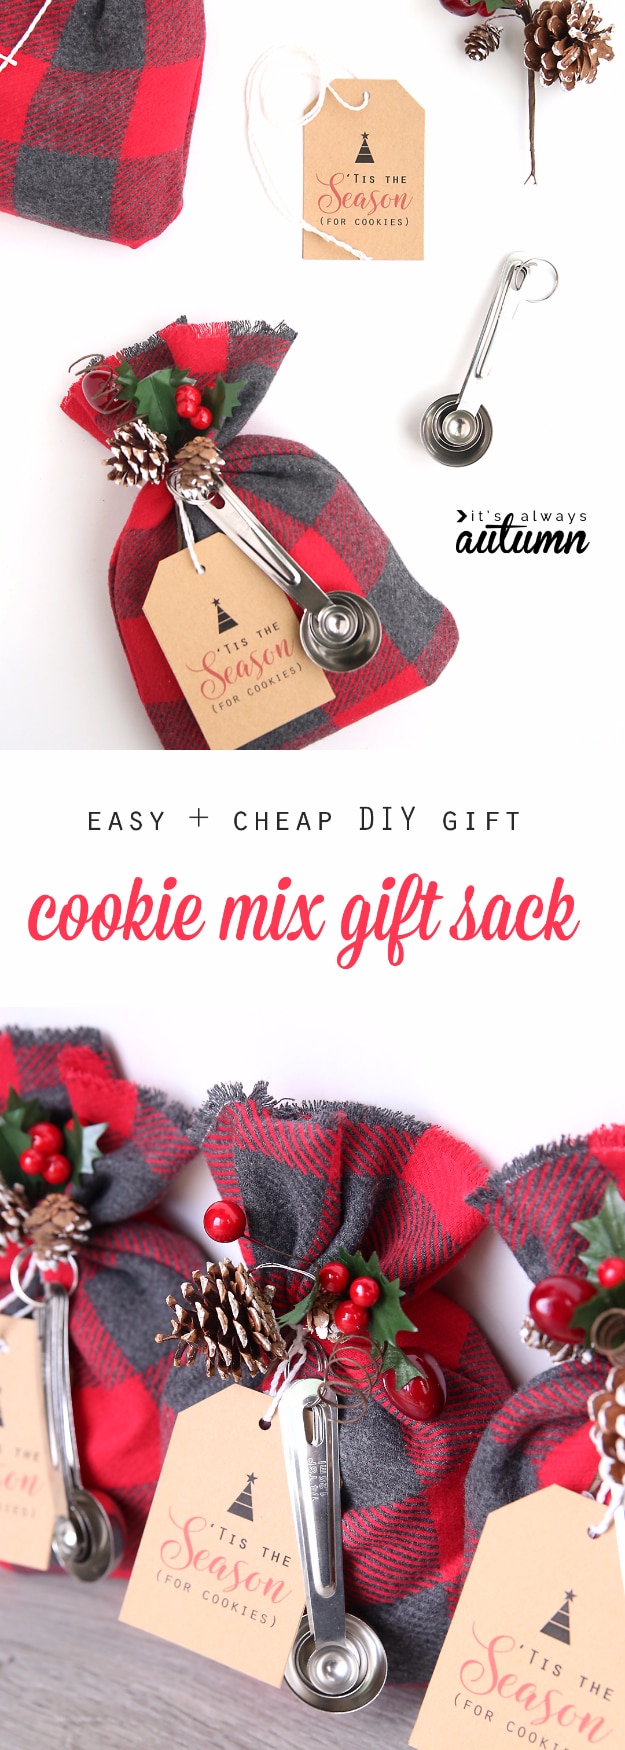 DIY Gift for the Office - Cookie Mix Gift Sack - DIY Gift Ideas for Your Boss and Coworkers - Cheap and Quick Presents to Make for Office Parties, Secret Santa Gifts - Cool Mason Jar Ideas, Creative Gift Baskets and Easy Office Christmas Presents 